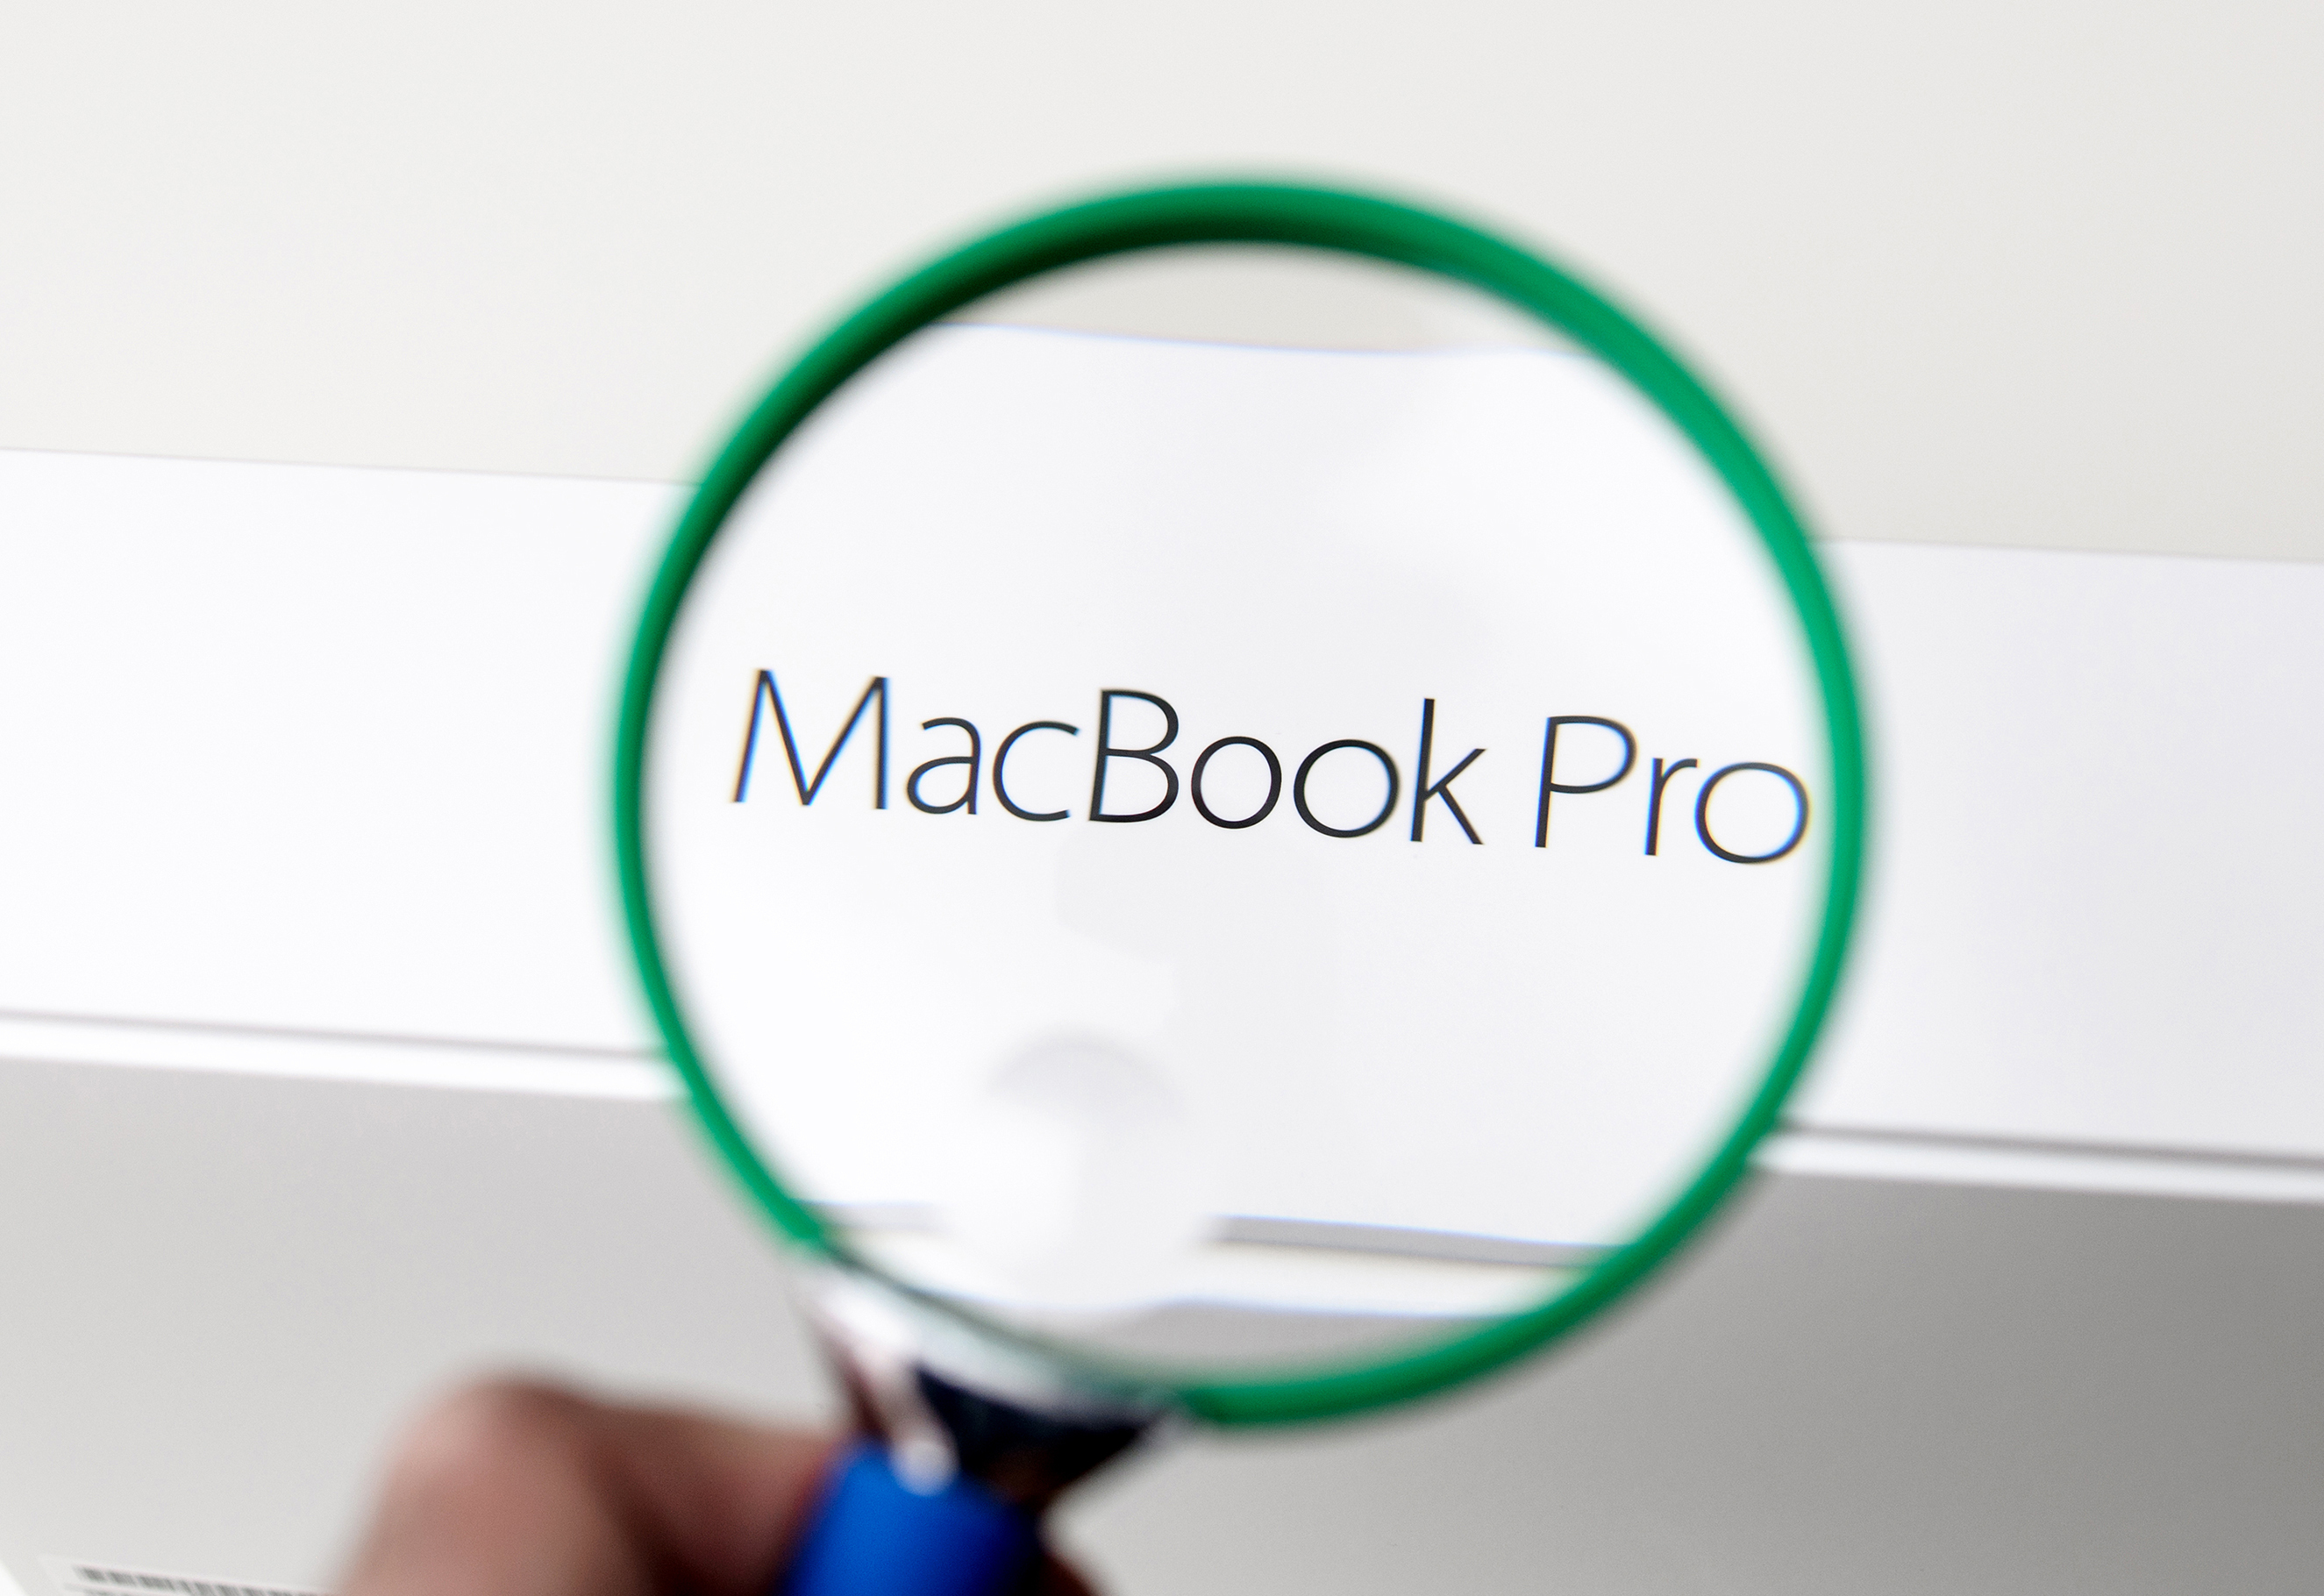 A Complete Guide to Buying Refurbished MacBooks